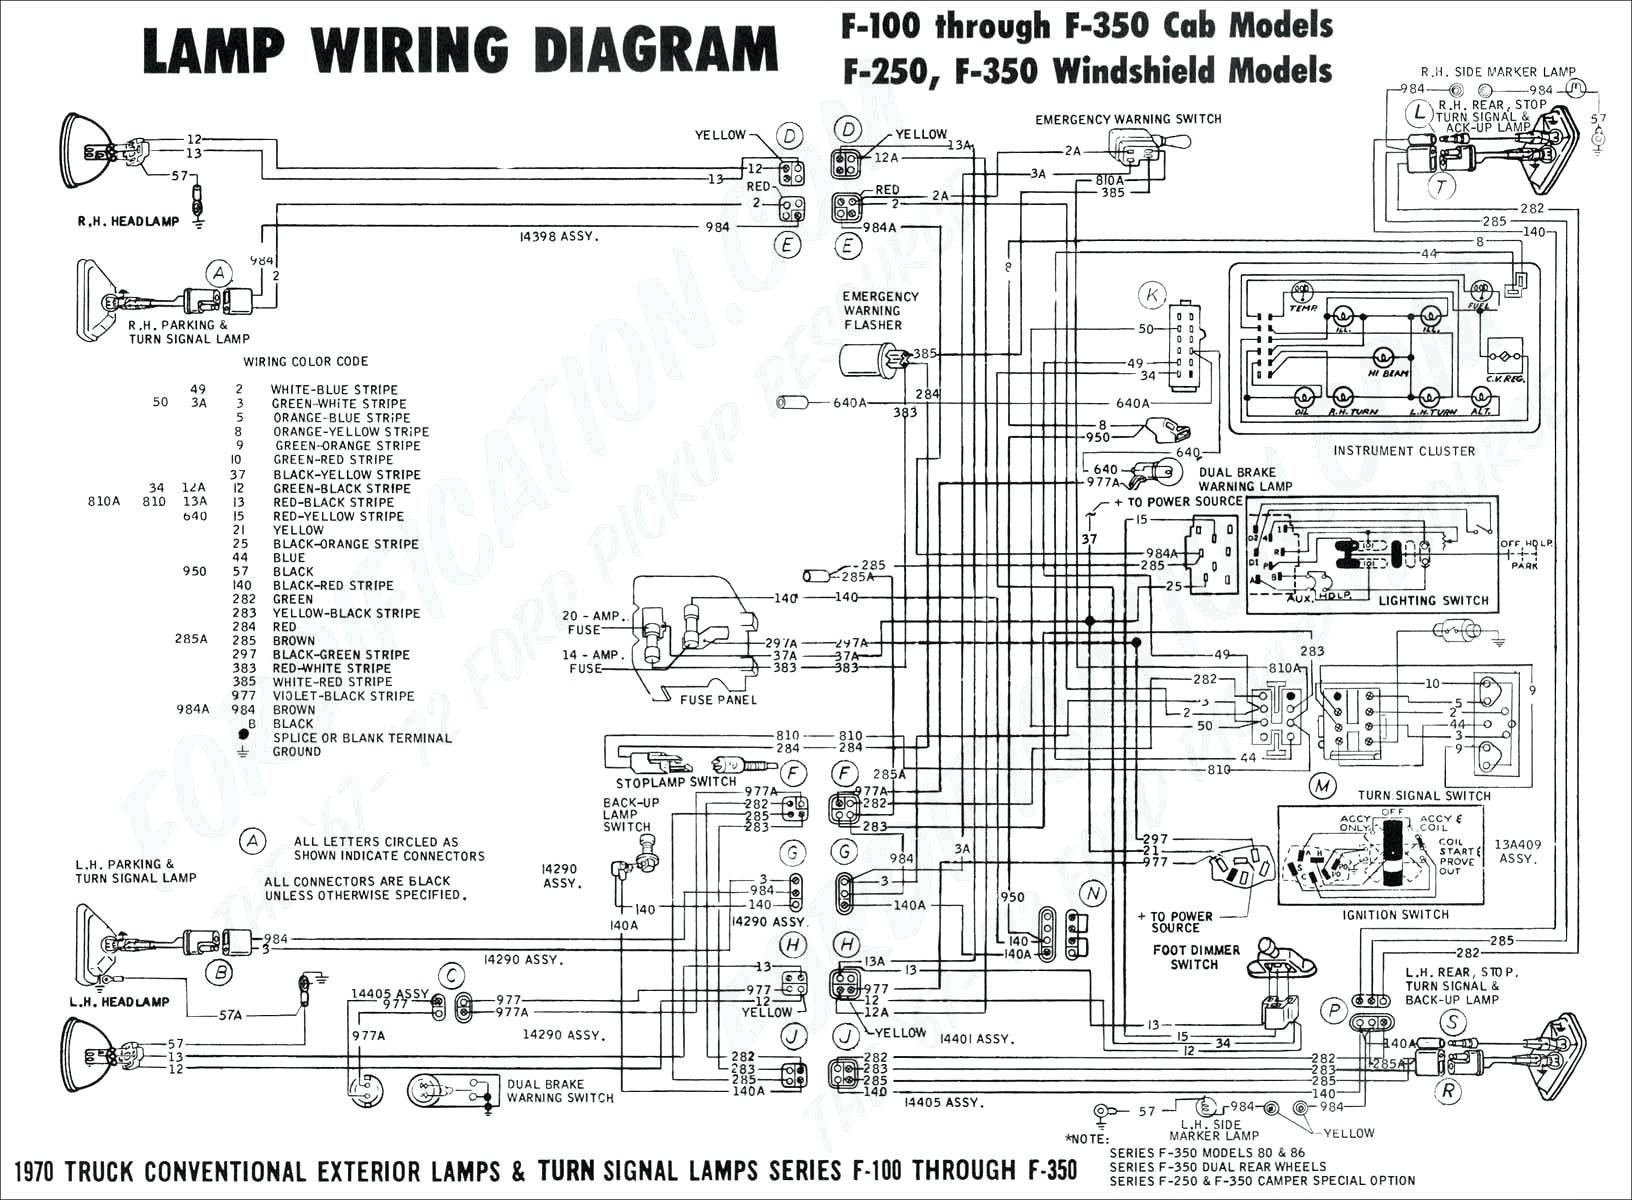 2000 ford Explorer Engine Diagram Diagram Further 2002 Land Rover Wiring Diagrams 2000 ford